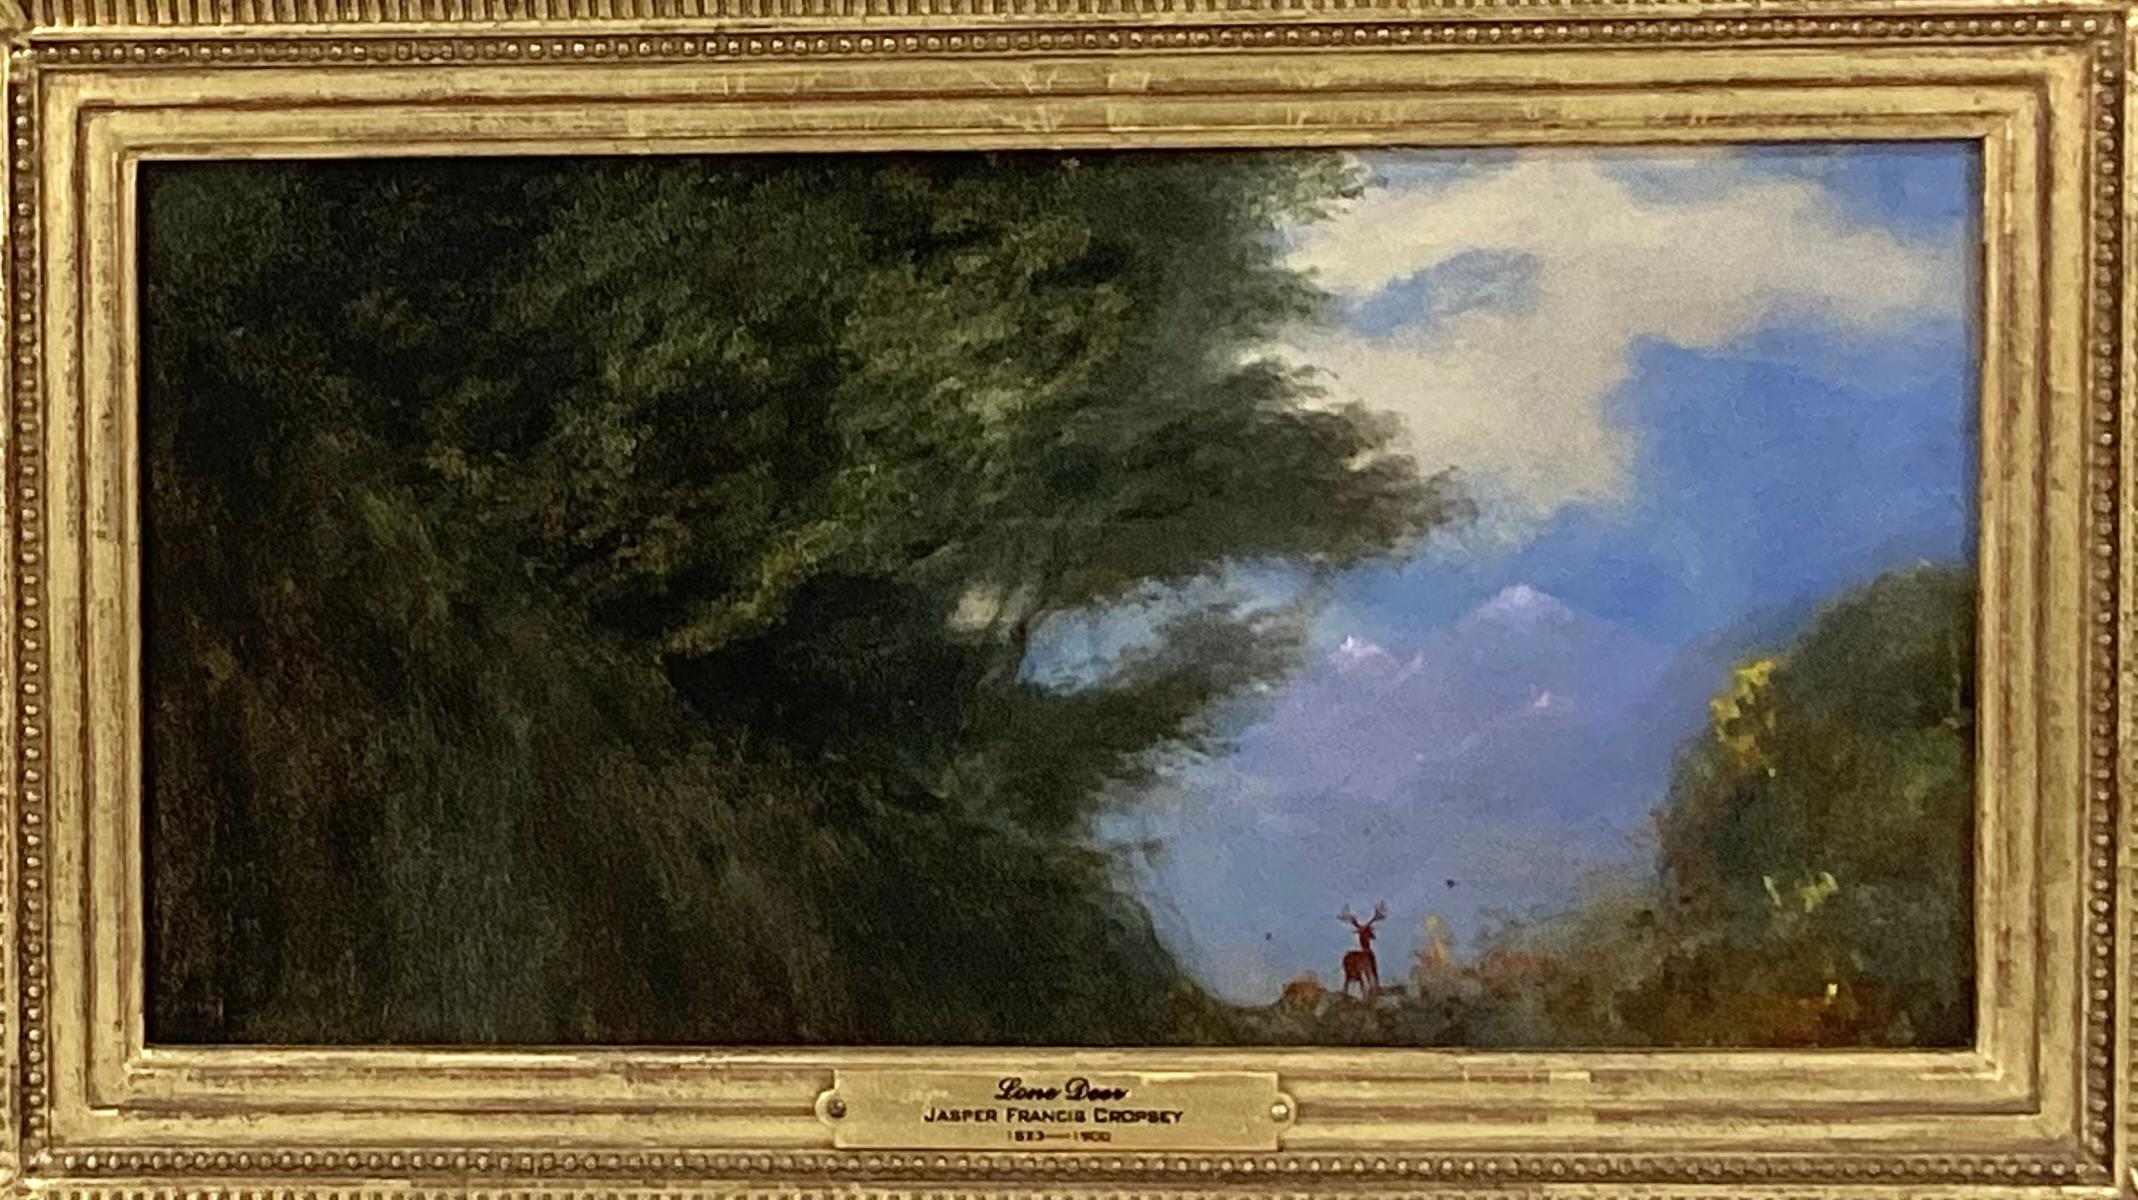 Signed and attributed to Jasper Francis Cropsey (American, 1823-1900) oil on board painting, titled Lone Deer. Earth tone green forest with blue sky and one lone brown deer. Dated and signed in lower right corner. Copy of a 2005 receipt from a New